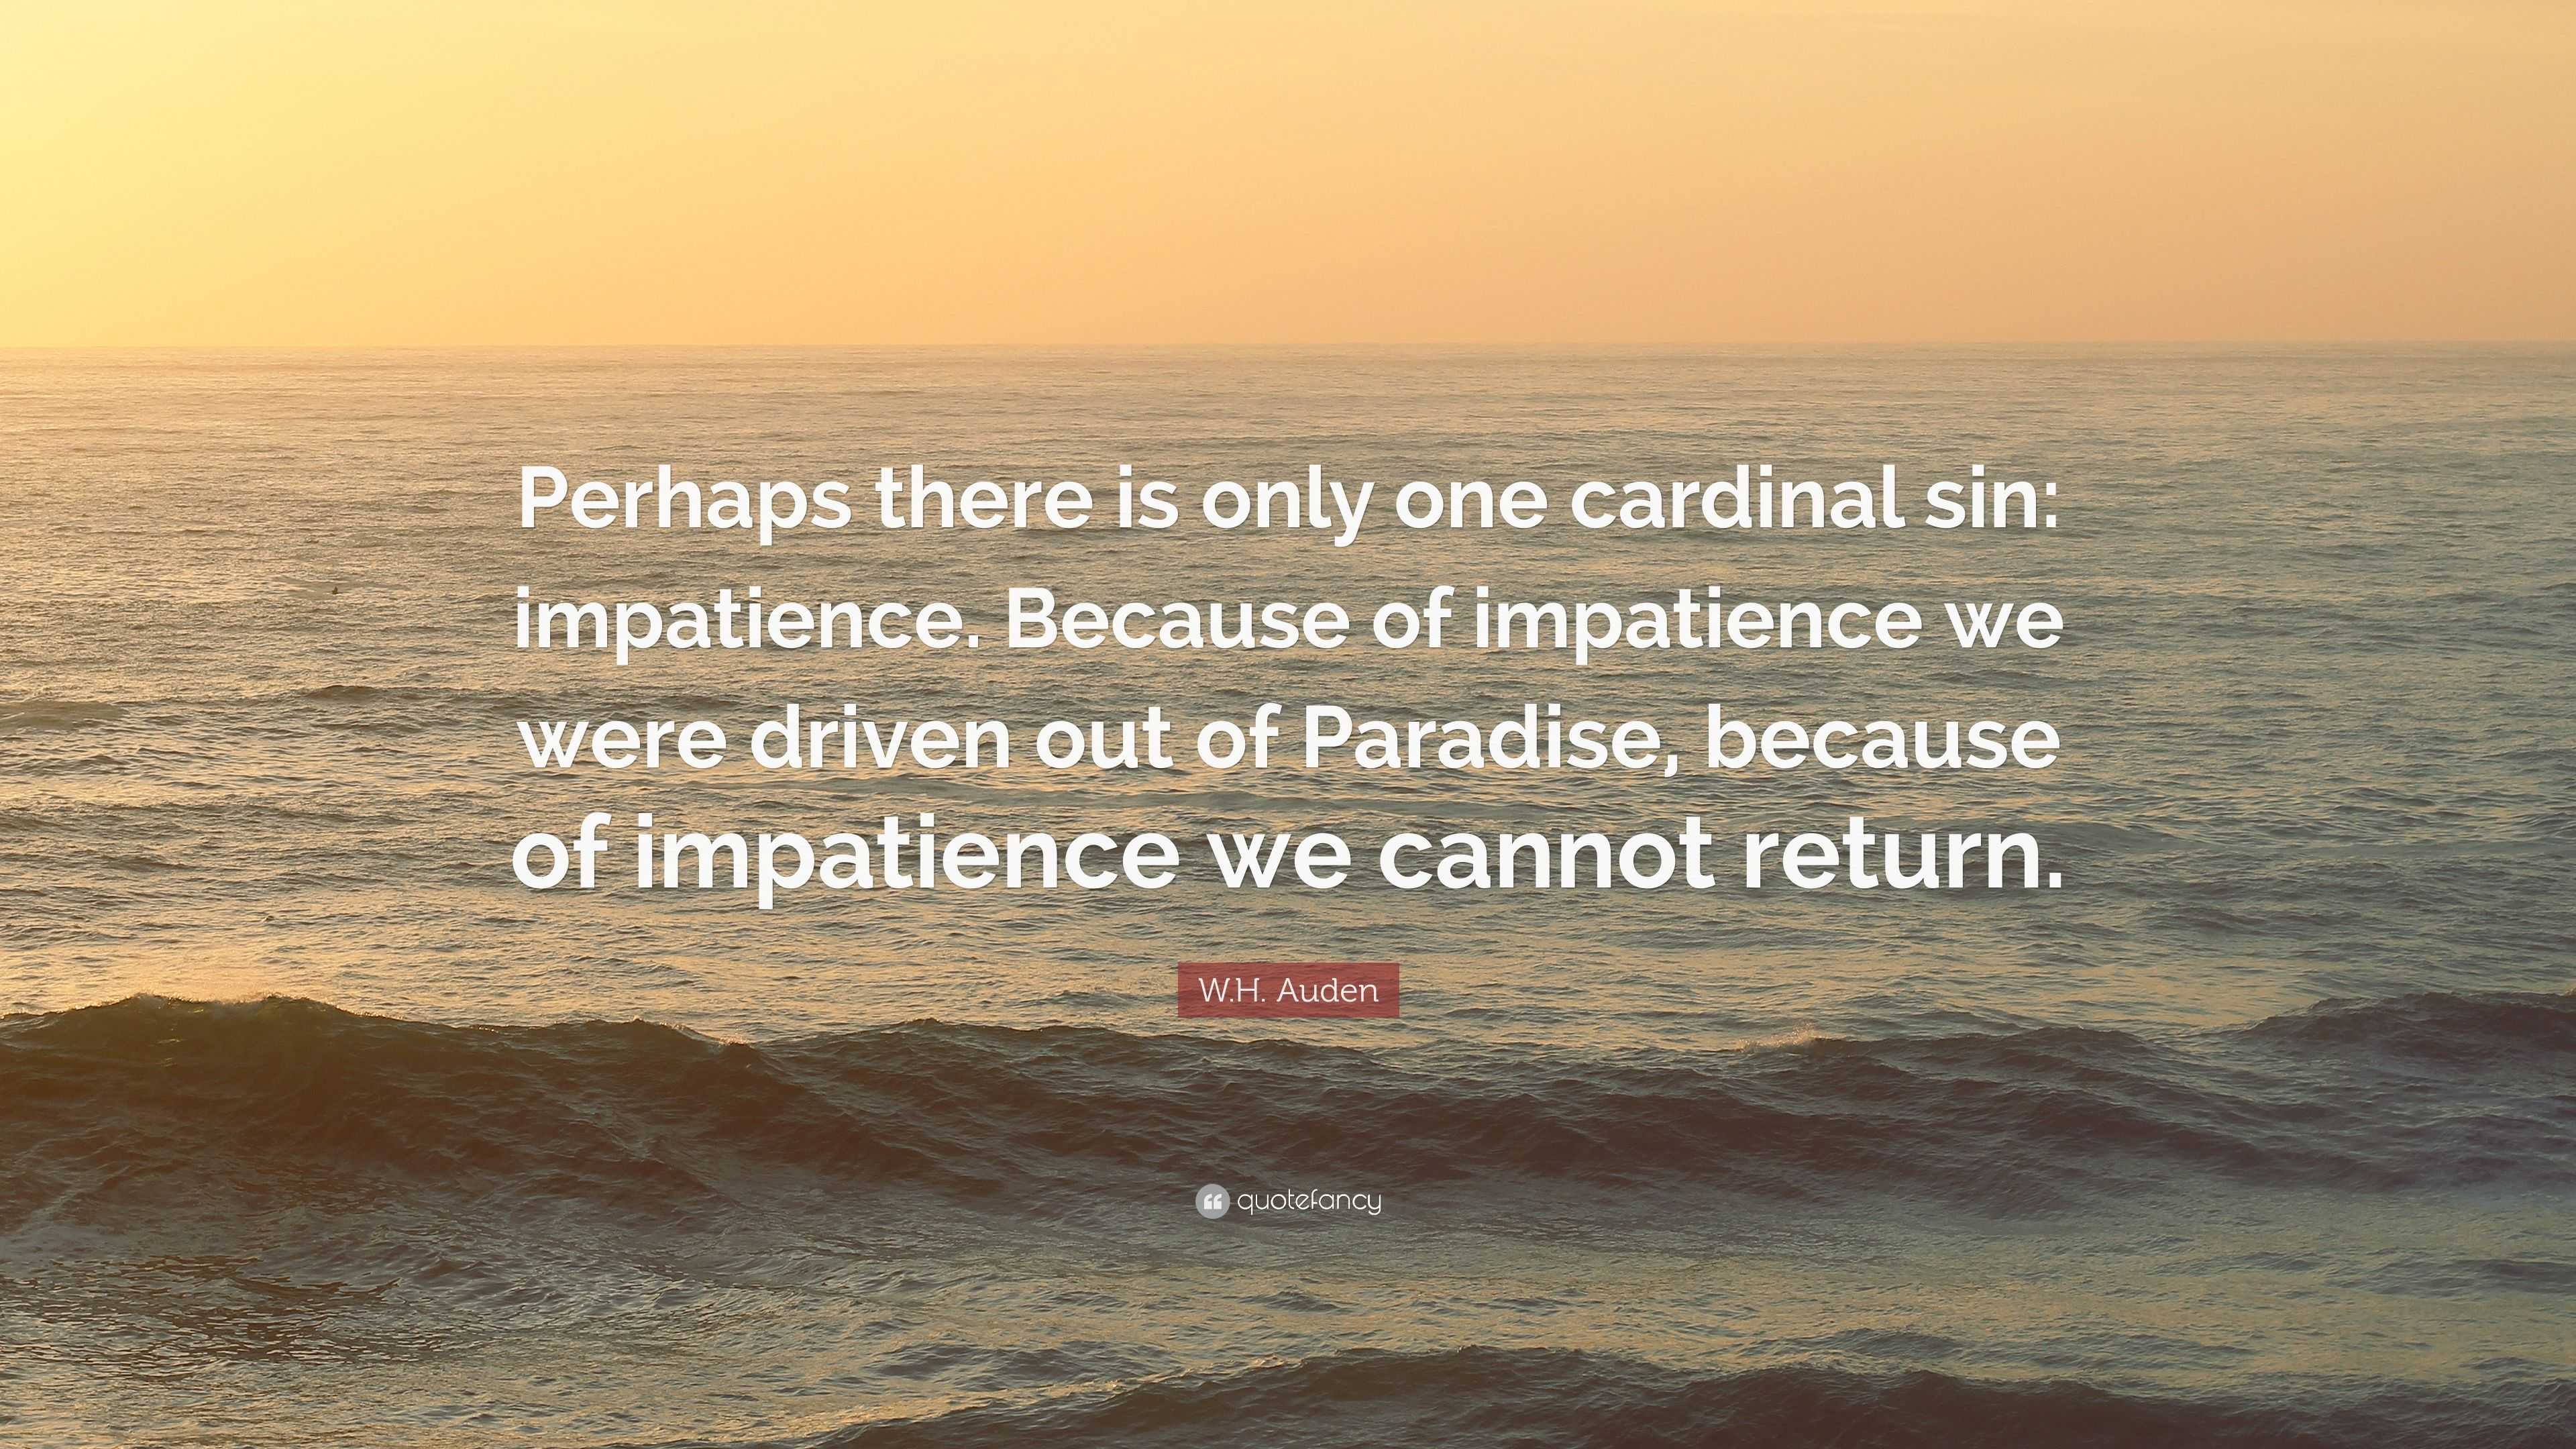 W.H. Auden Quote: “Perhaps there is only one cardinal sin: impatience ...